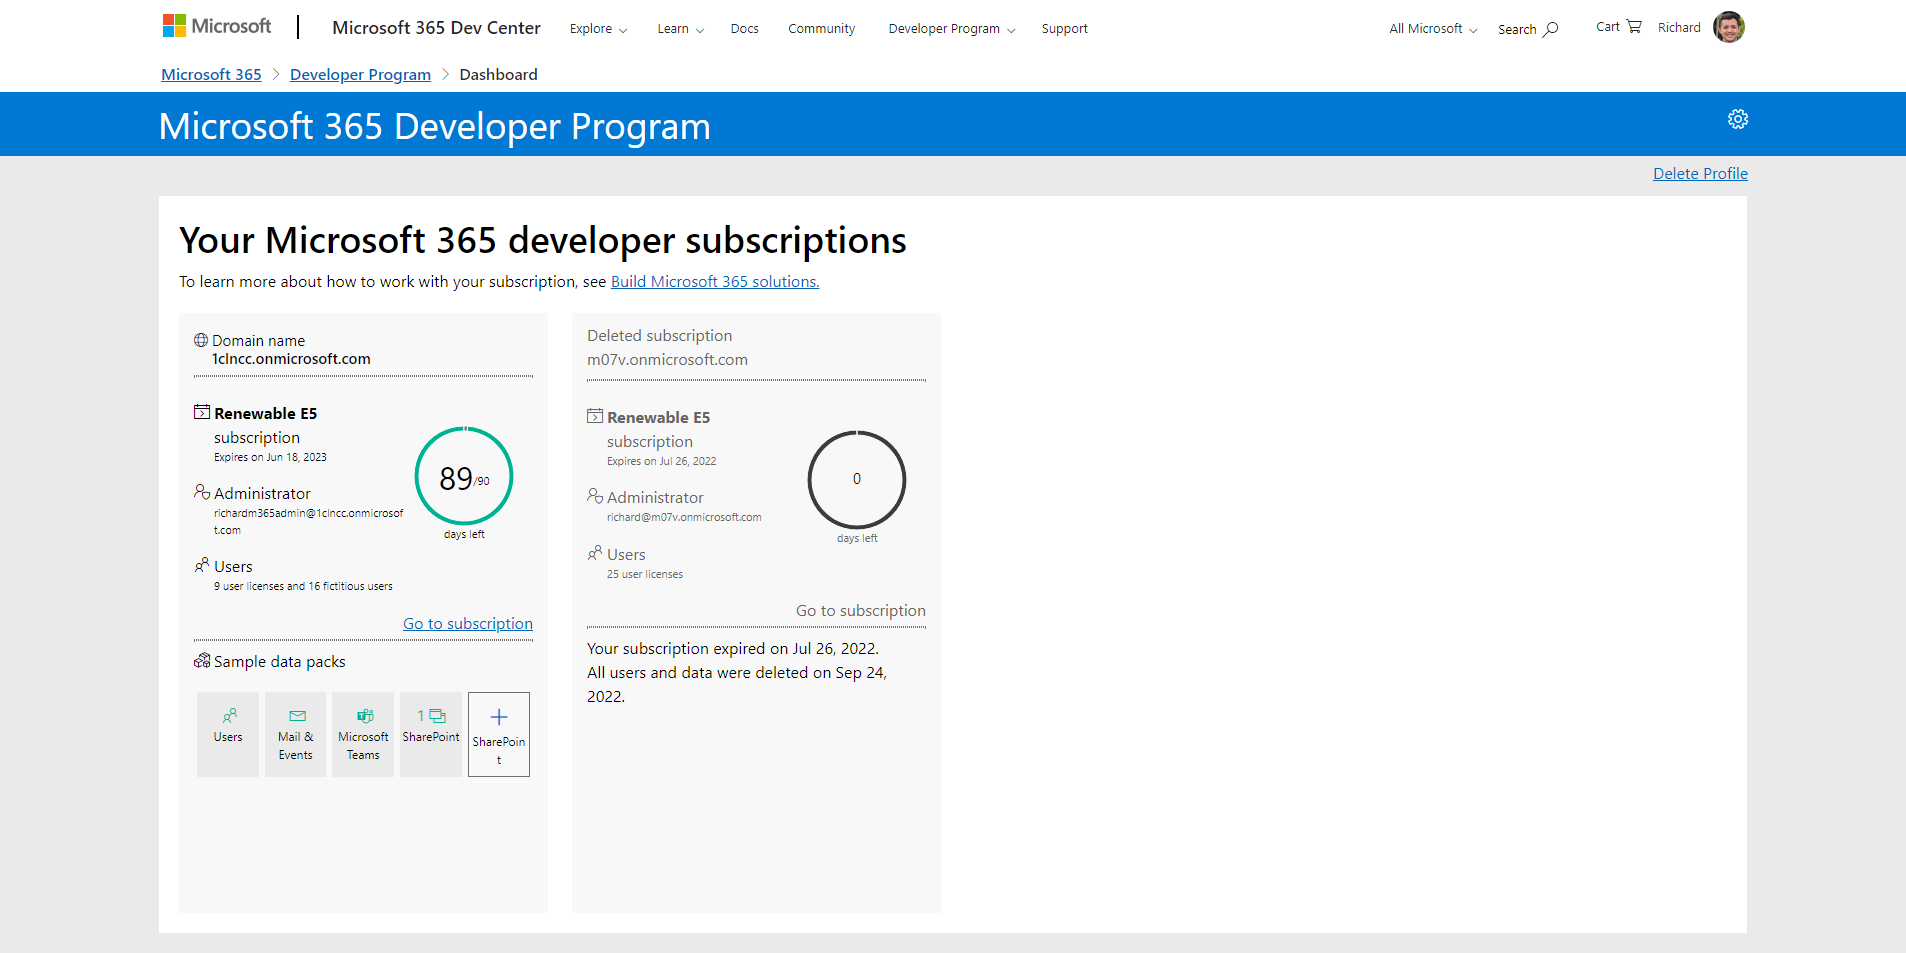 Screen showing the newly-created Microsoft 365 subscription